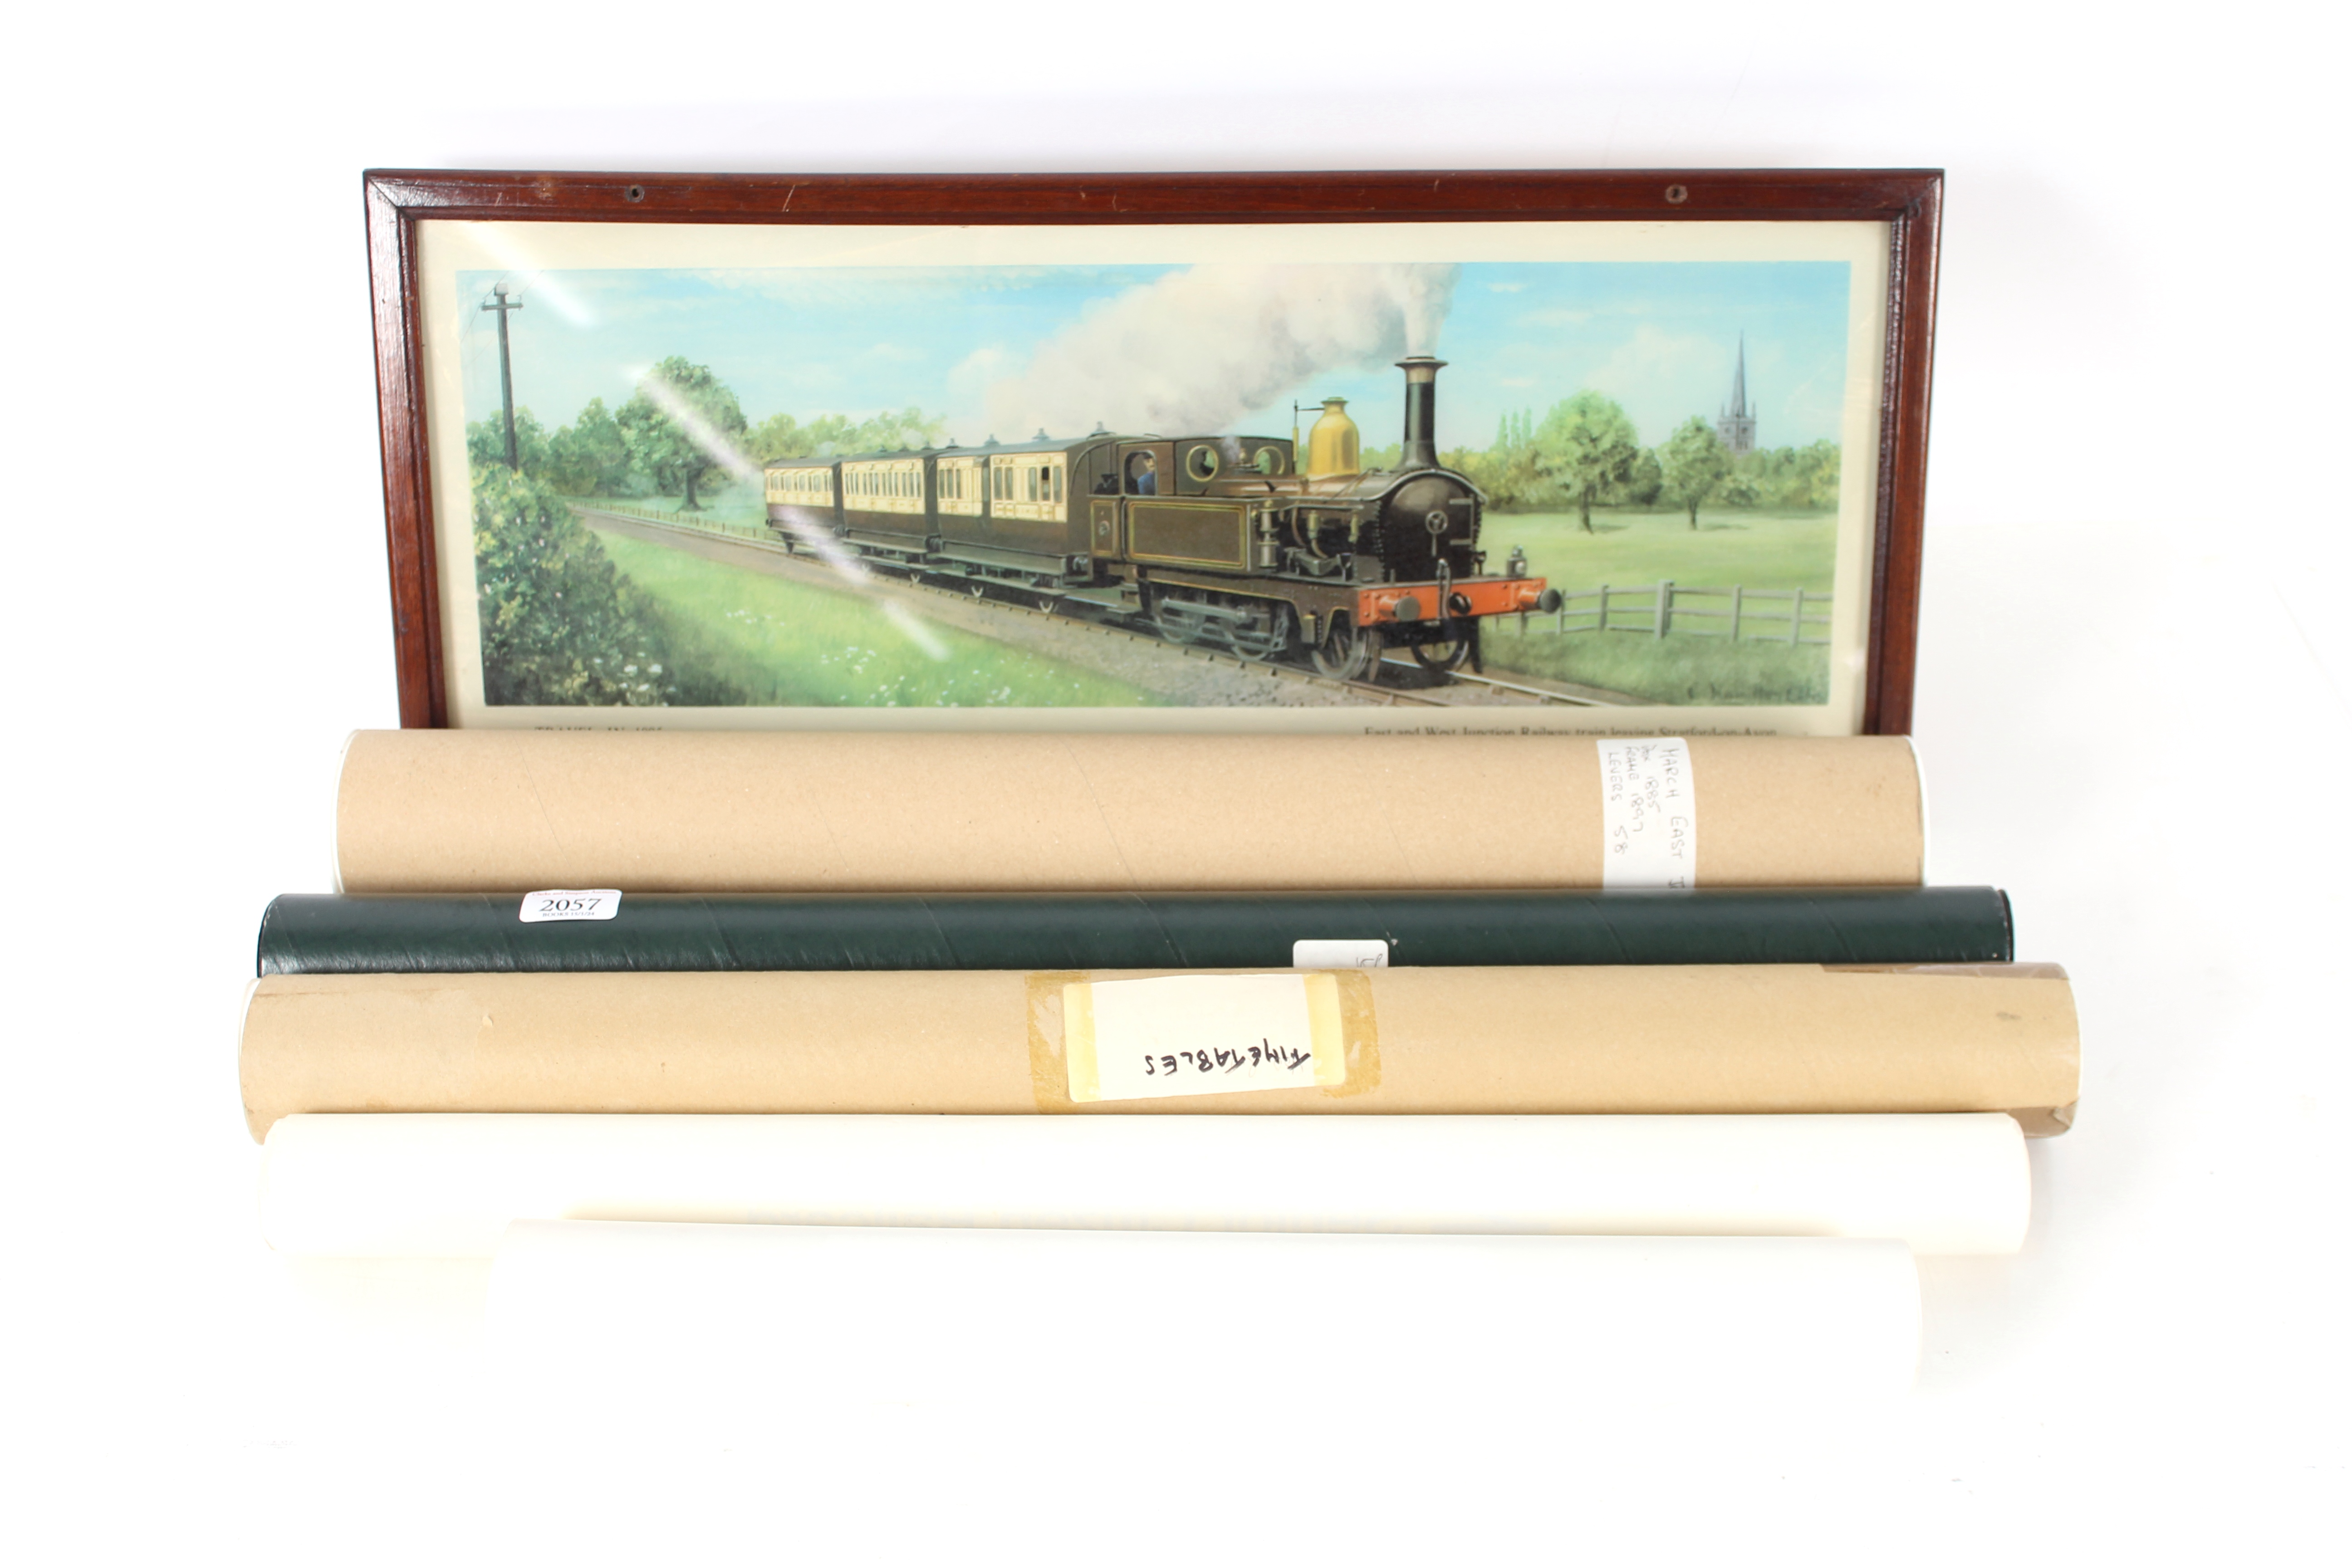 A roll of Railway Timetables and an East Anglia "D